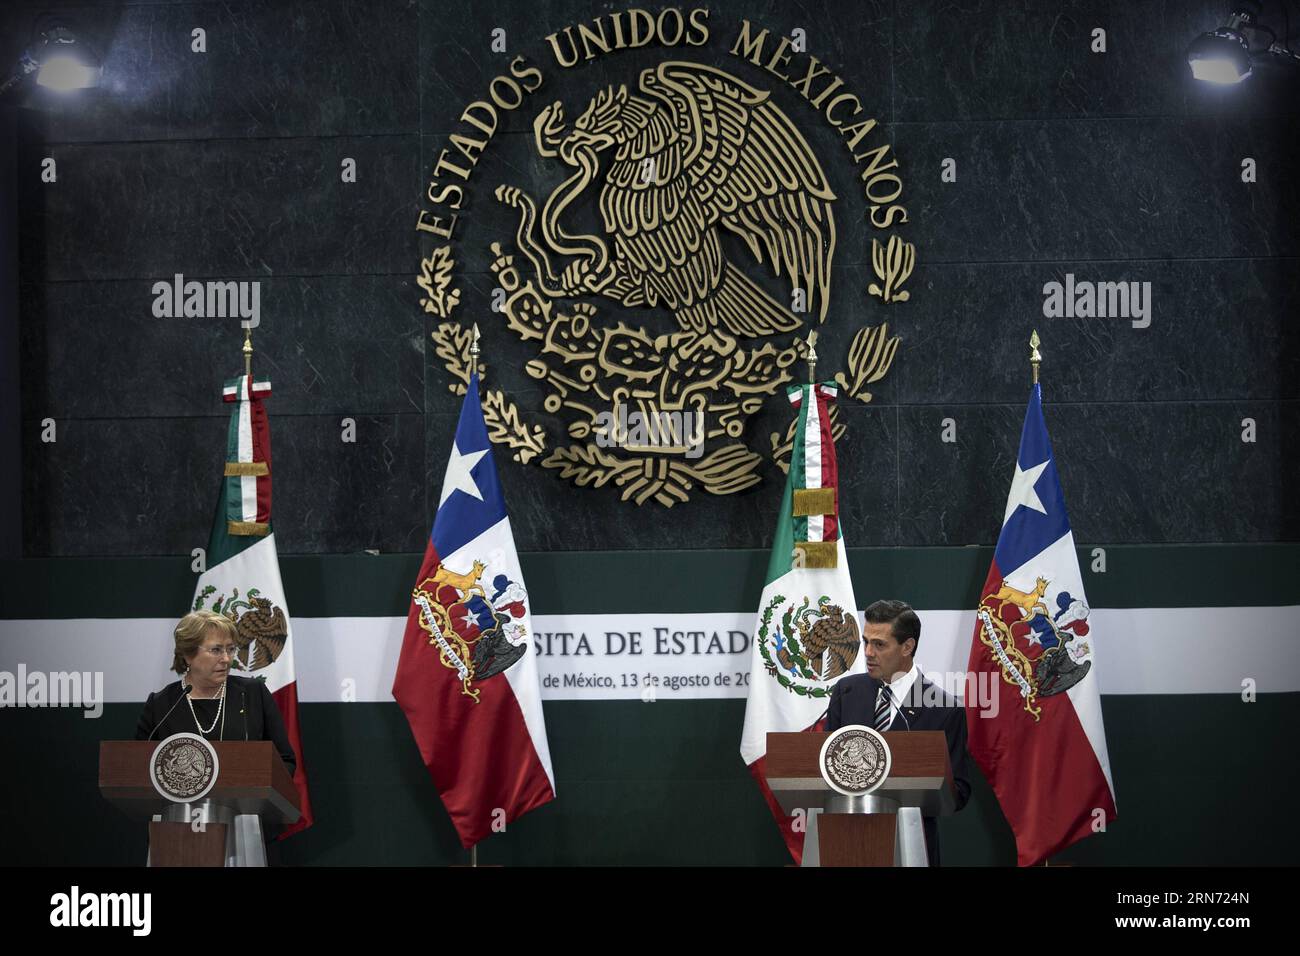 (150813) -- MEXICO CITY, Aug. 13, 2015 -- Mexican President Enrique Pena Nieto (R) and his Chilean counterpart Michelle Bachelet take part in a joint press conference at Los Pinos Official Residence, in Mexico City, capital of Mexico, on Aug. 13, 2015. Michelle Bachelet started on Thursday a two-day State visit to Mexico. Alejandro Ayala) (fnc) MEXICO-MEXICO CITY-CHILE-PRESIDENT-VISIT e AlejandroxAyala PUBLICATIONxNOTxINxCHN   150813 Mexico City Aug 13 2015 MEXICAN President Enrique Pena Nieto r and His Chilean Part Michelle Bachelet Take Part in a Joint Press Conference AT Los Pinos Official Stock Photo